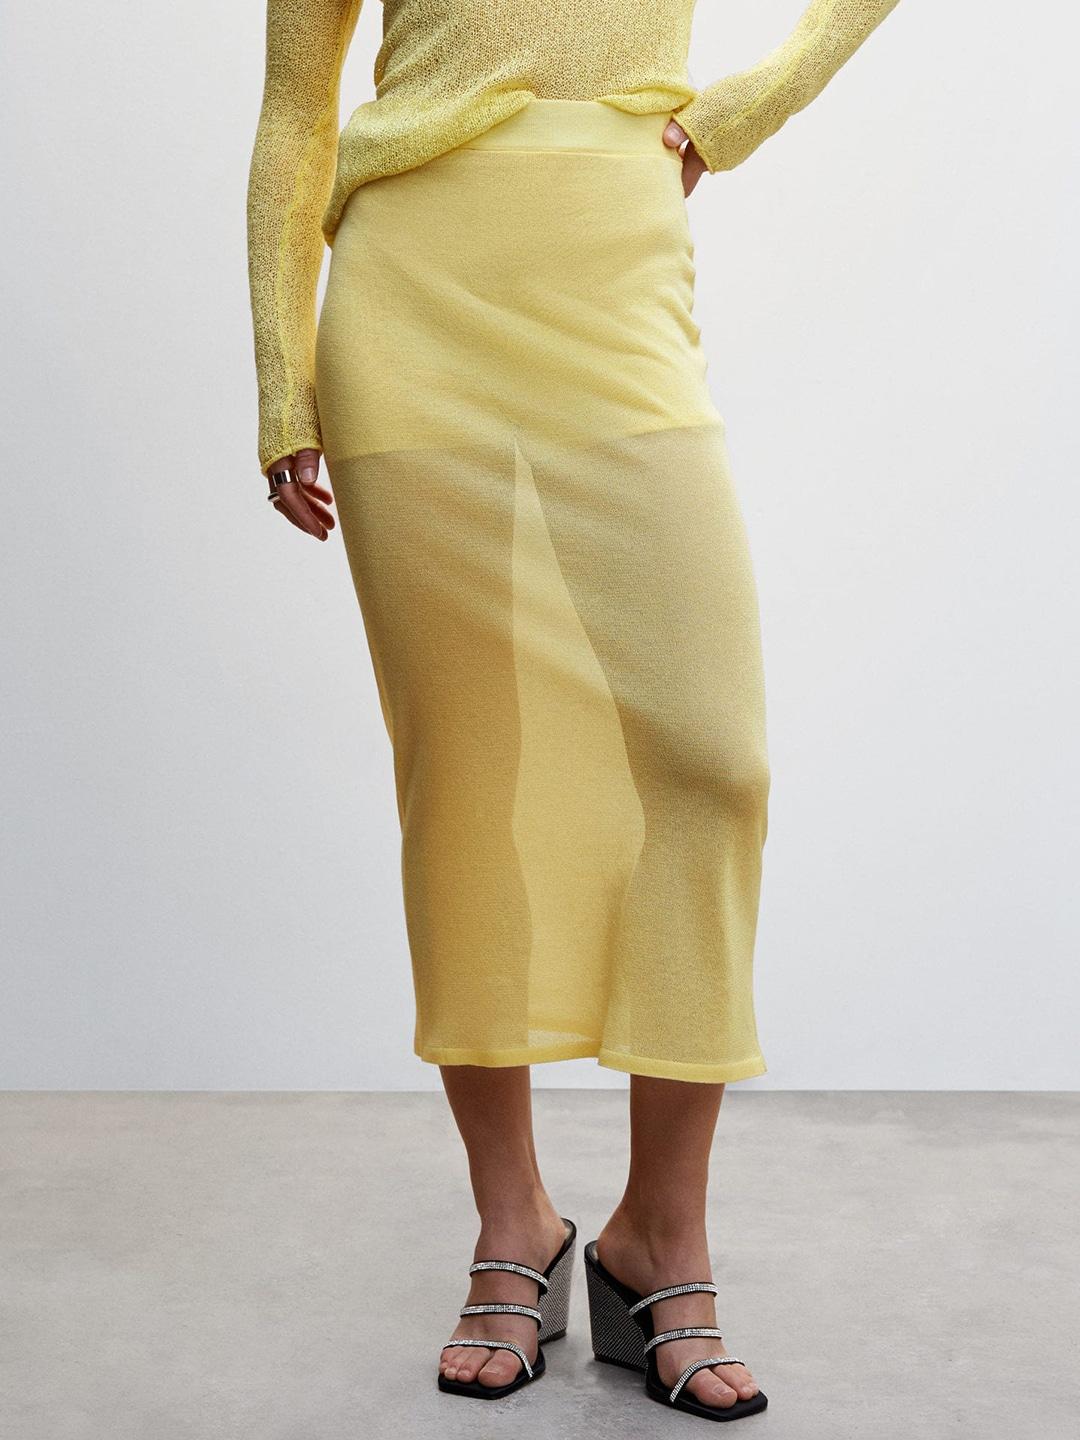 mango semi-sheer knitted midi skirt with attached shorts